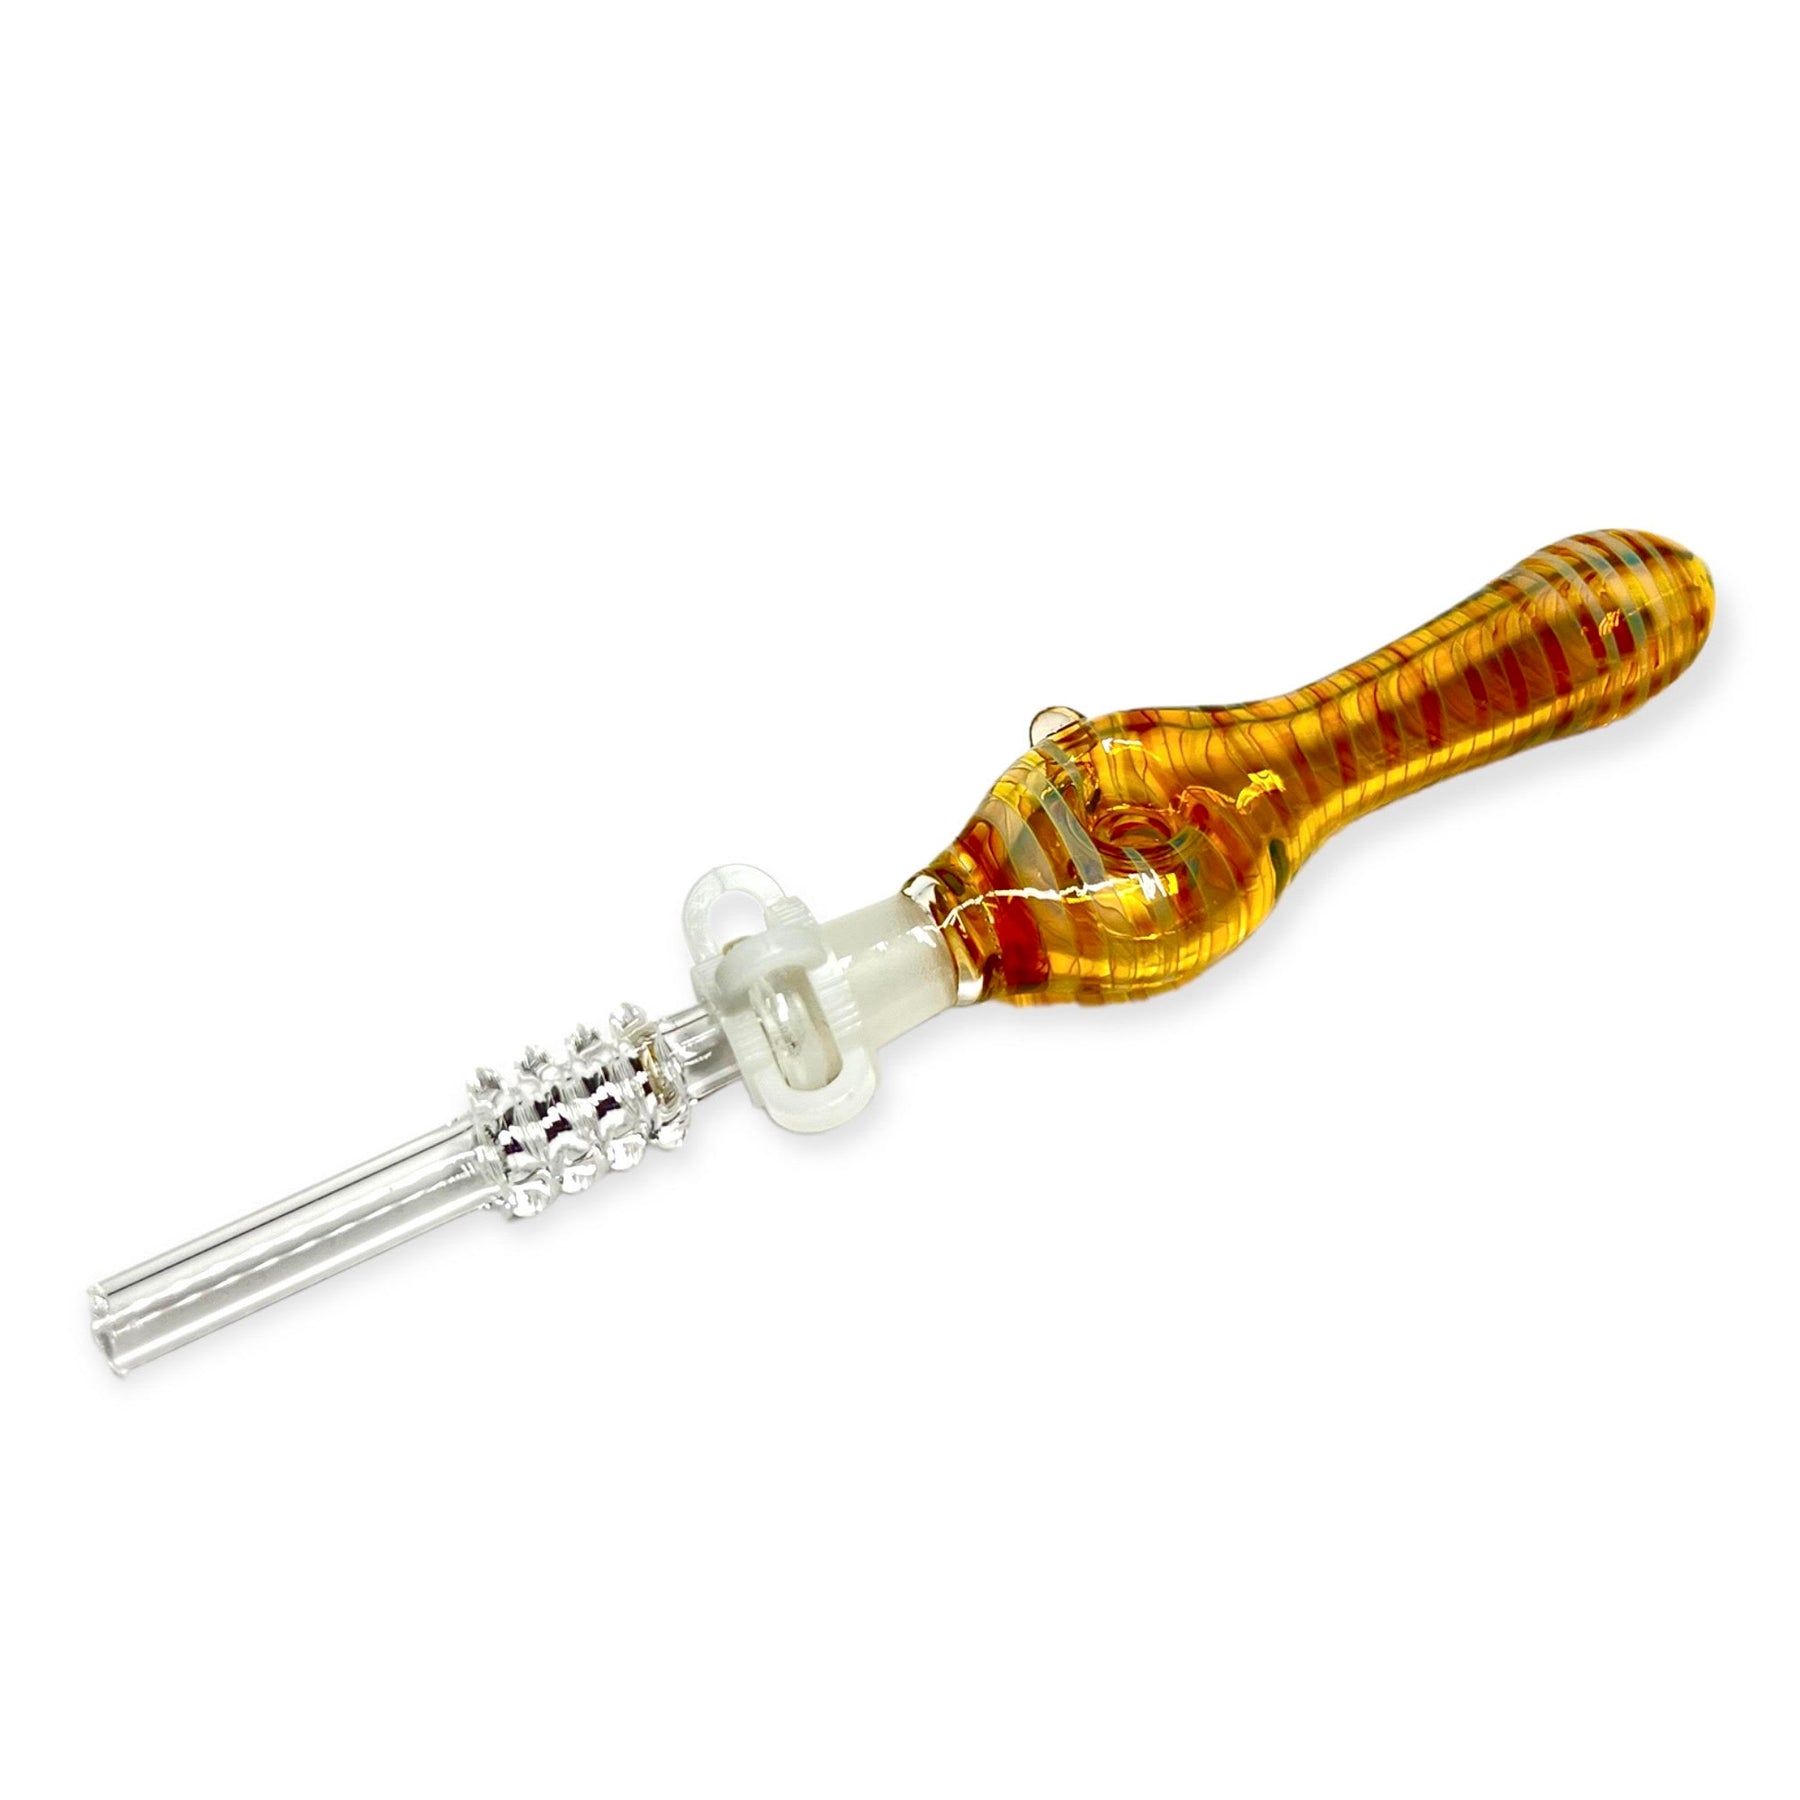 Nectar Collector with Quartz Tip Donut Yellow